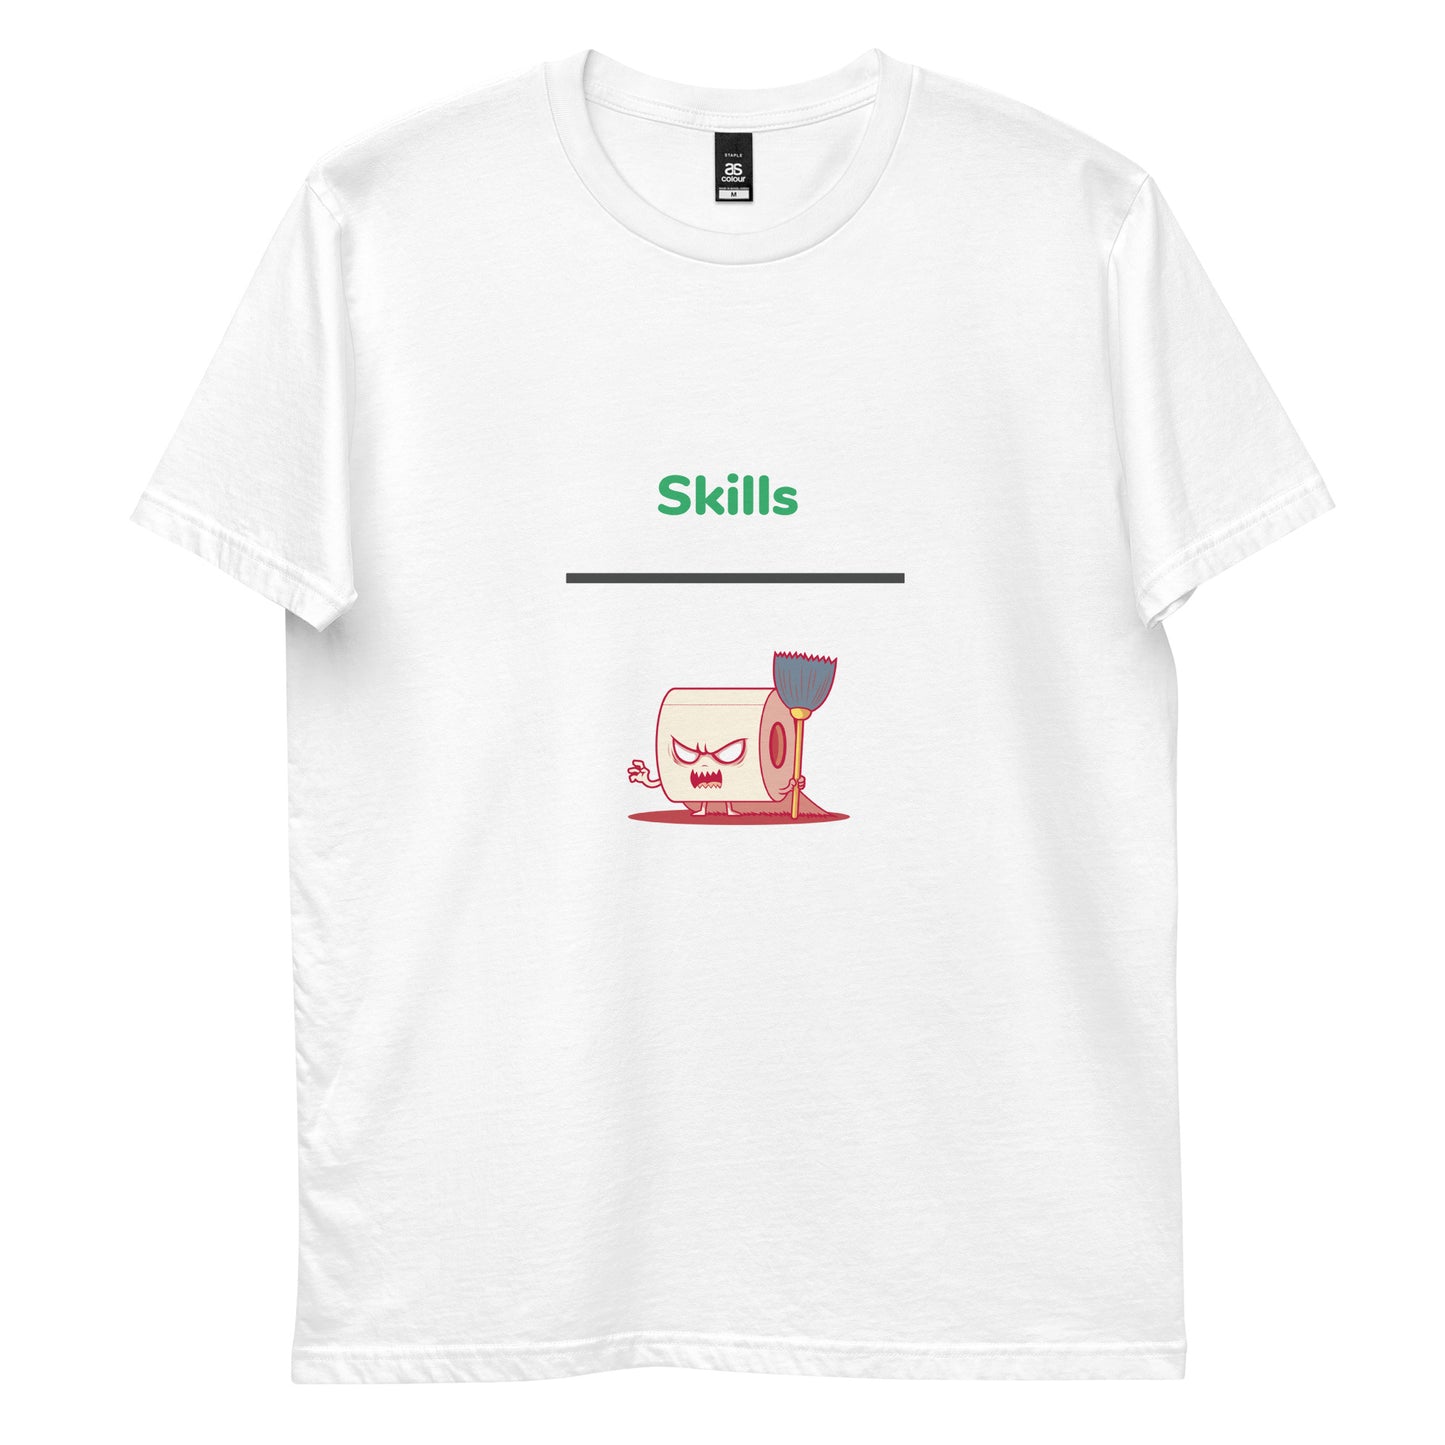 Skills Over Roles